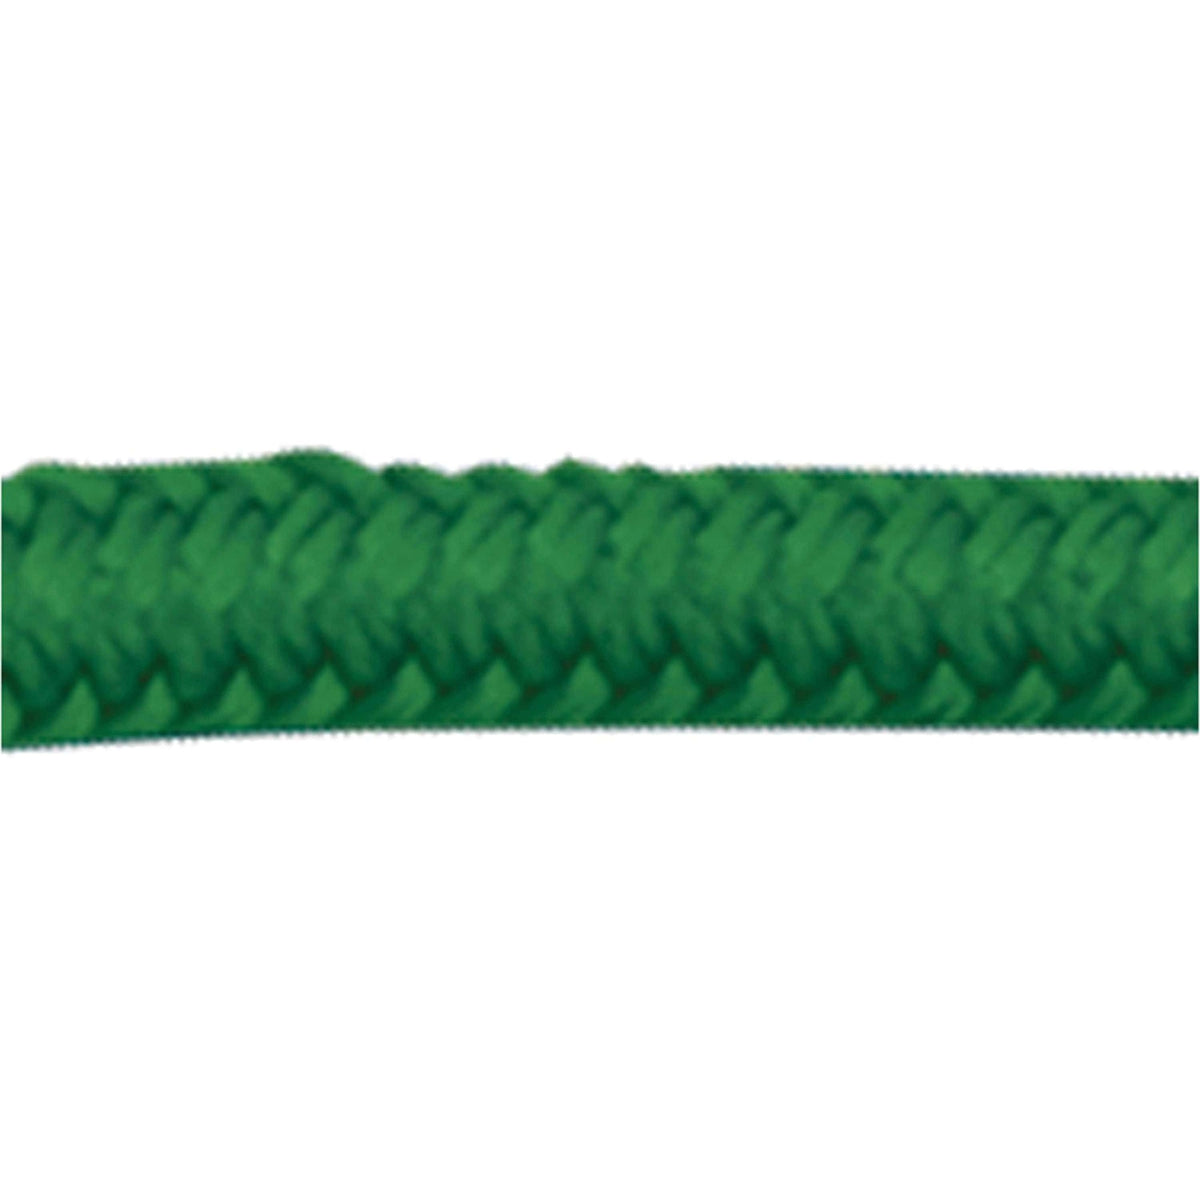 Sea-Dog Qualifies for Free Shipping Sea-Dog Double Braided Nylon Dock Line 1/2" 20' Green #302112020GN-1